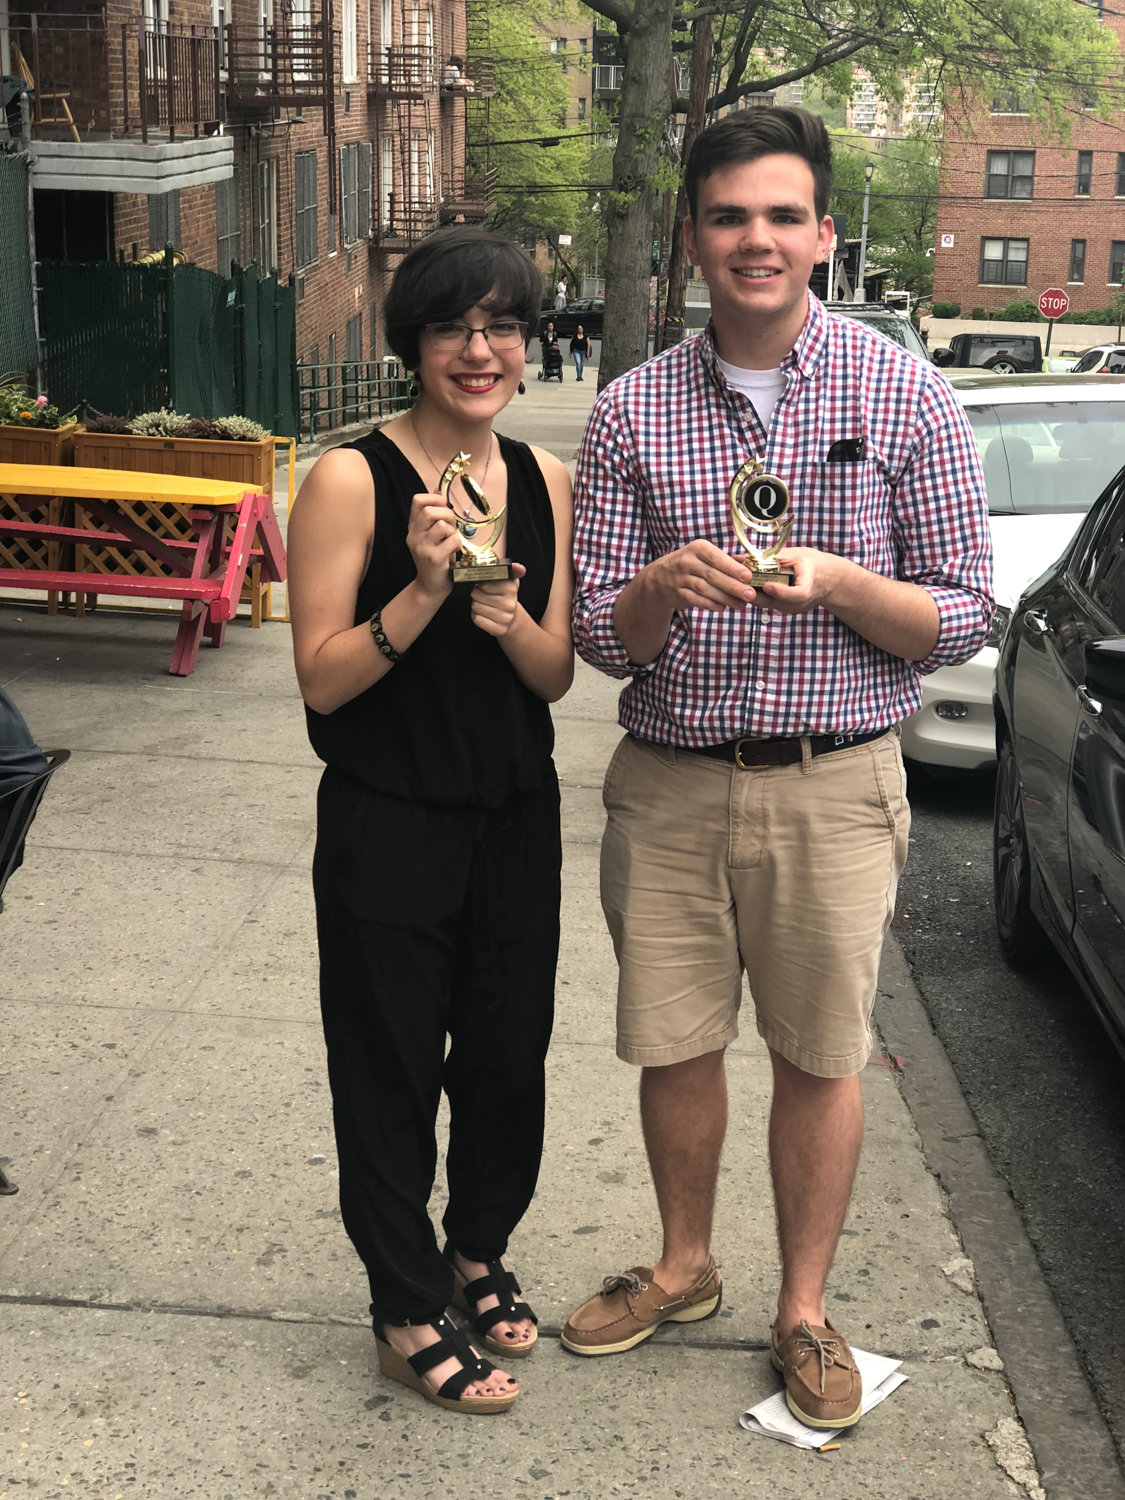 Rose Brennan shared the award for Best News Article with The Quadrangle’s managing editor Stephen Zubrycky for a story about the decline of Manhattan College’s chemical engineering department in 2018.